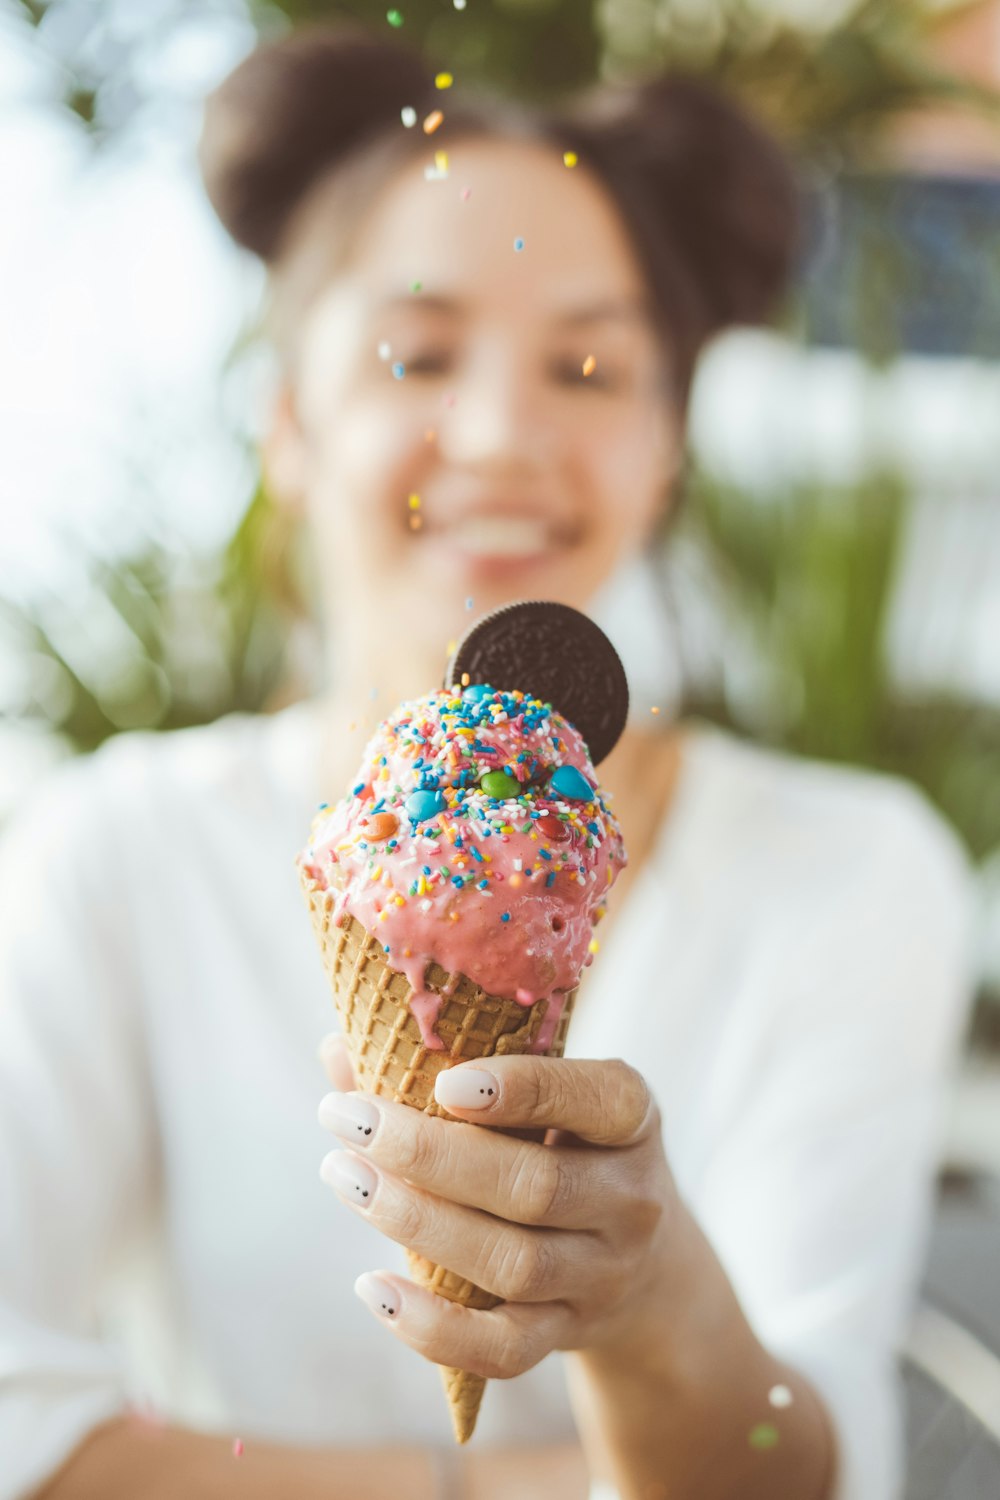 30,000+ Ice Cream Shop Pictures  Download Free Images on Unsplash